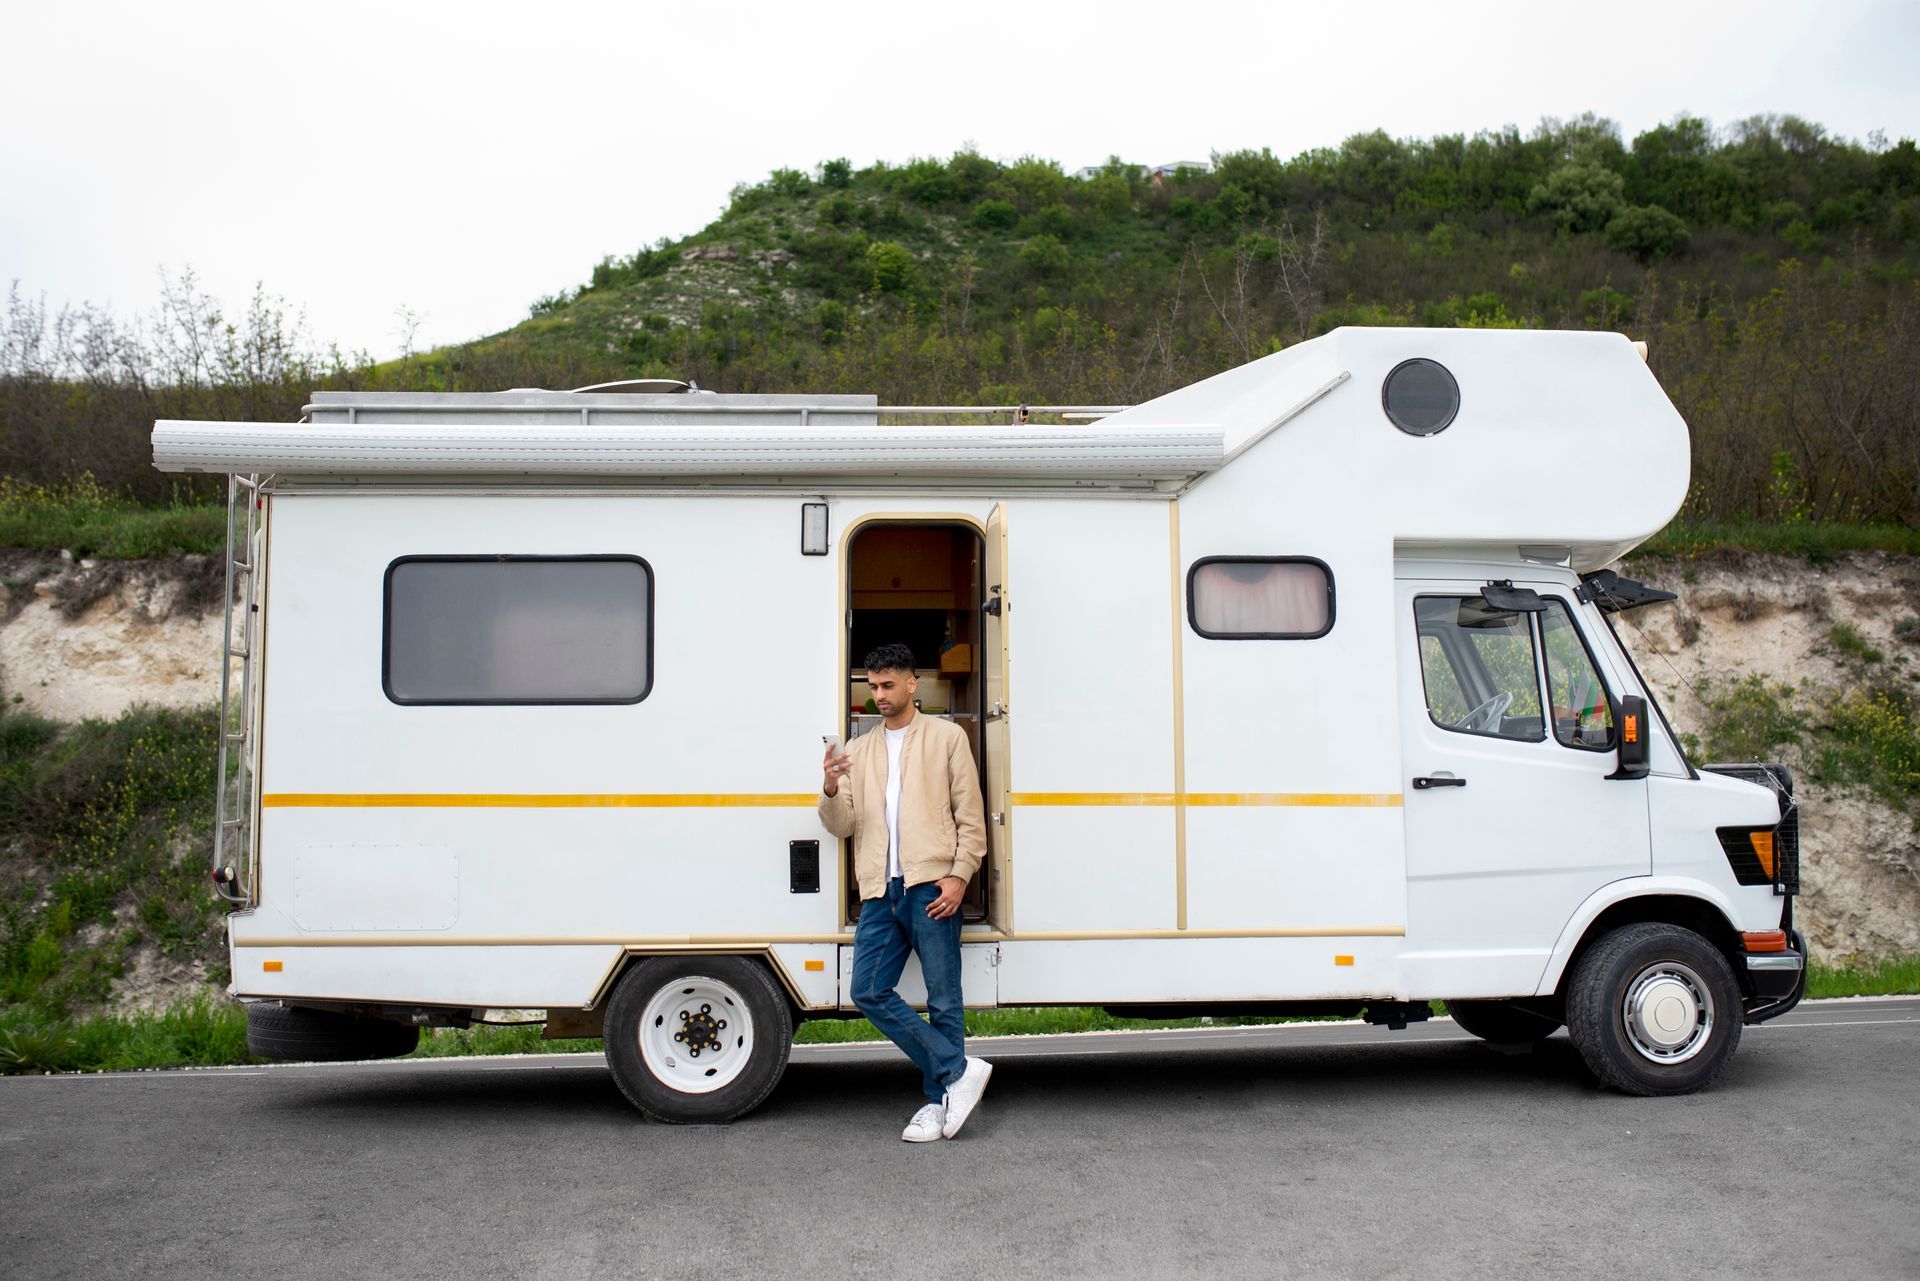 a man is standing next to a white rv on the side of the road .